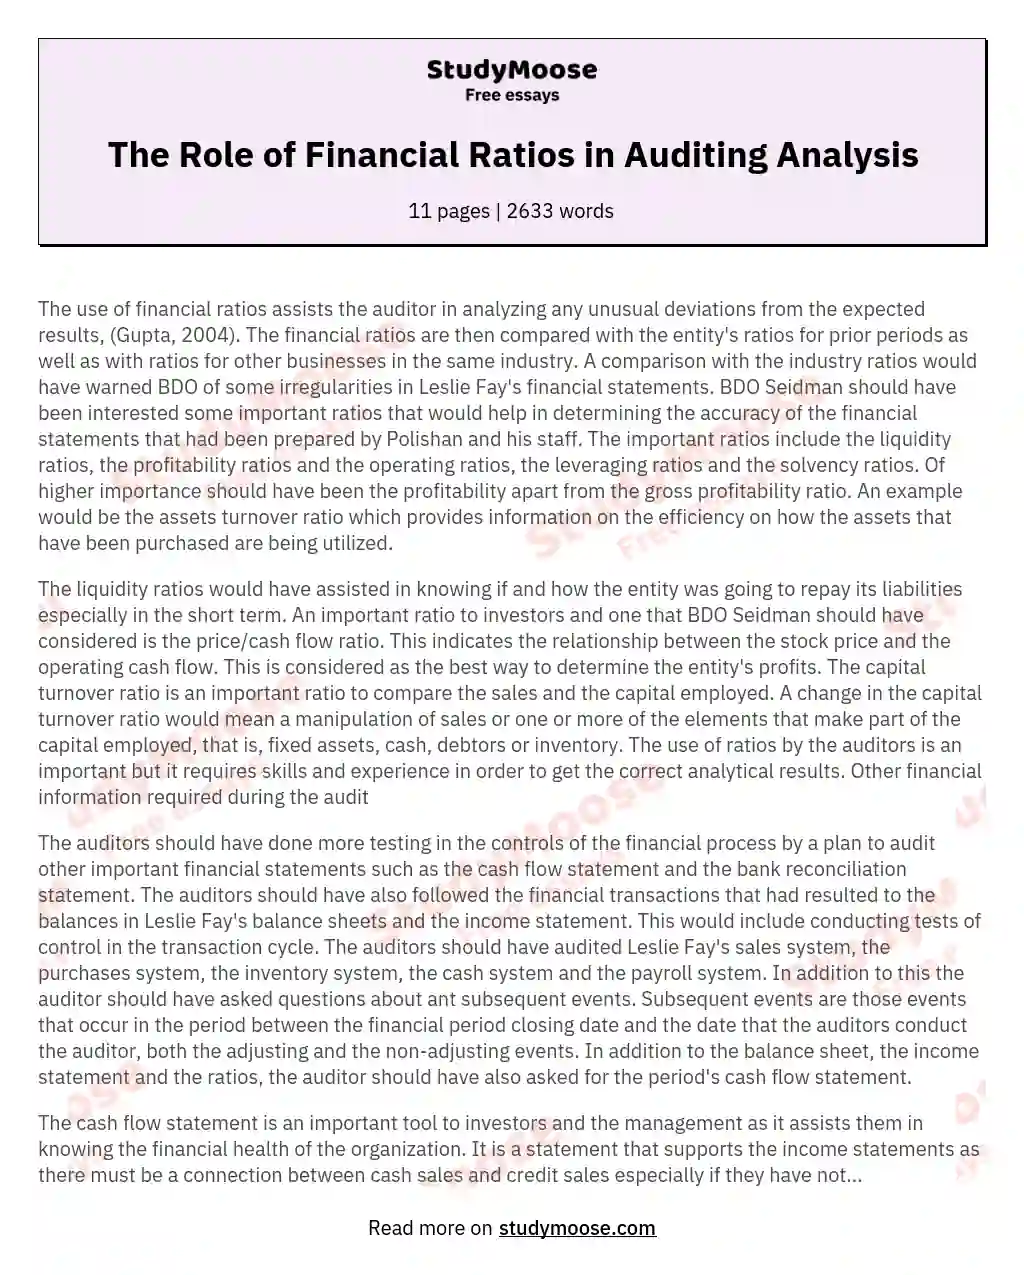 The Role of Financial Ratios in Auditing Analysis essay